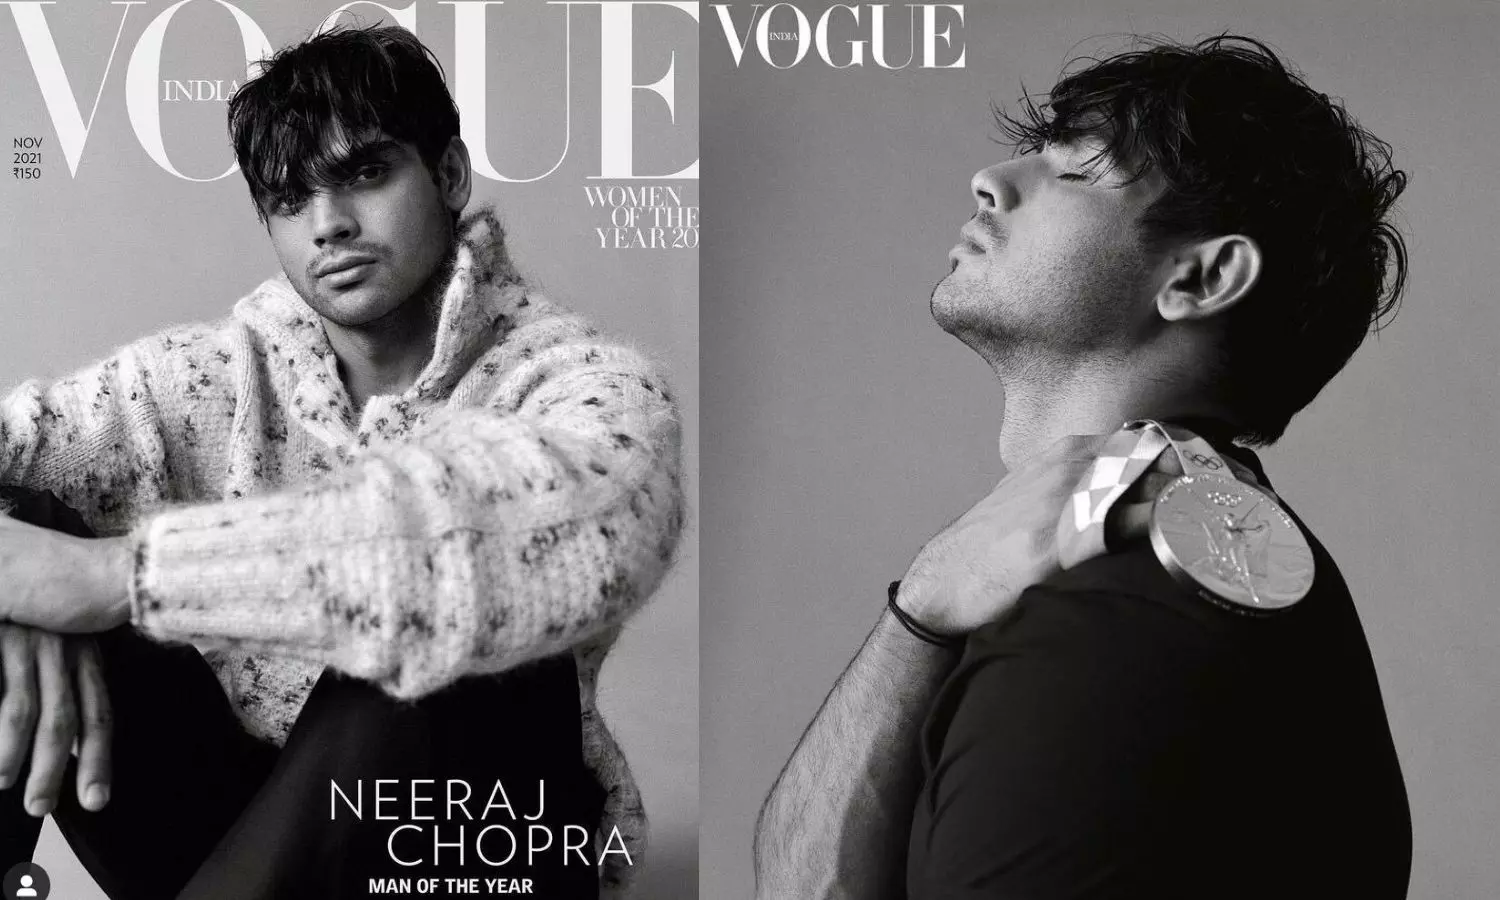 Neeraj Chopra becomes first male athlete to debut on Vogue India cover